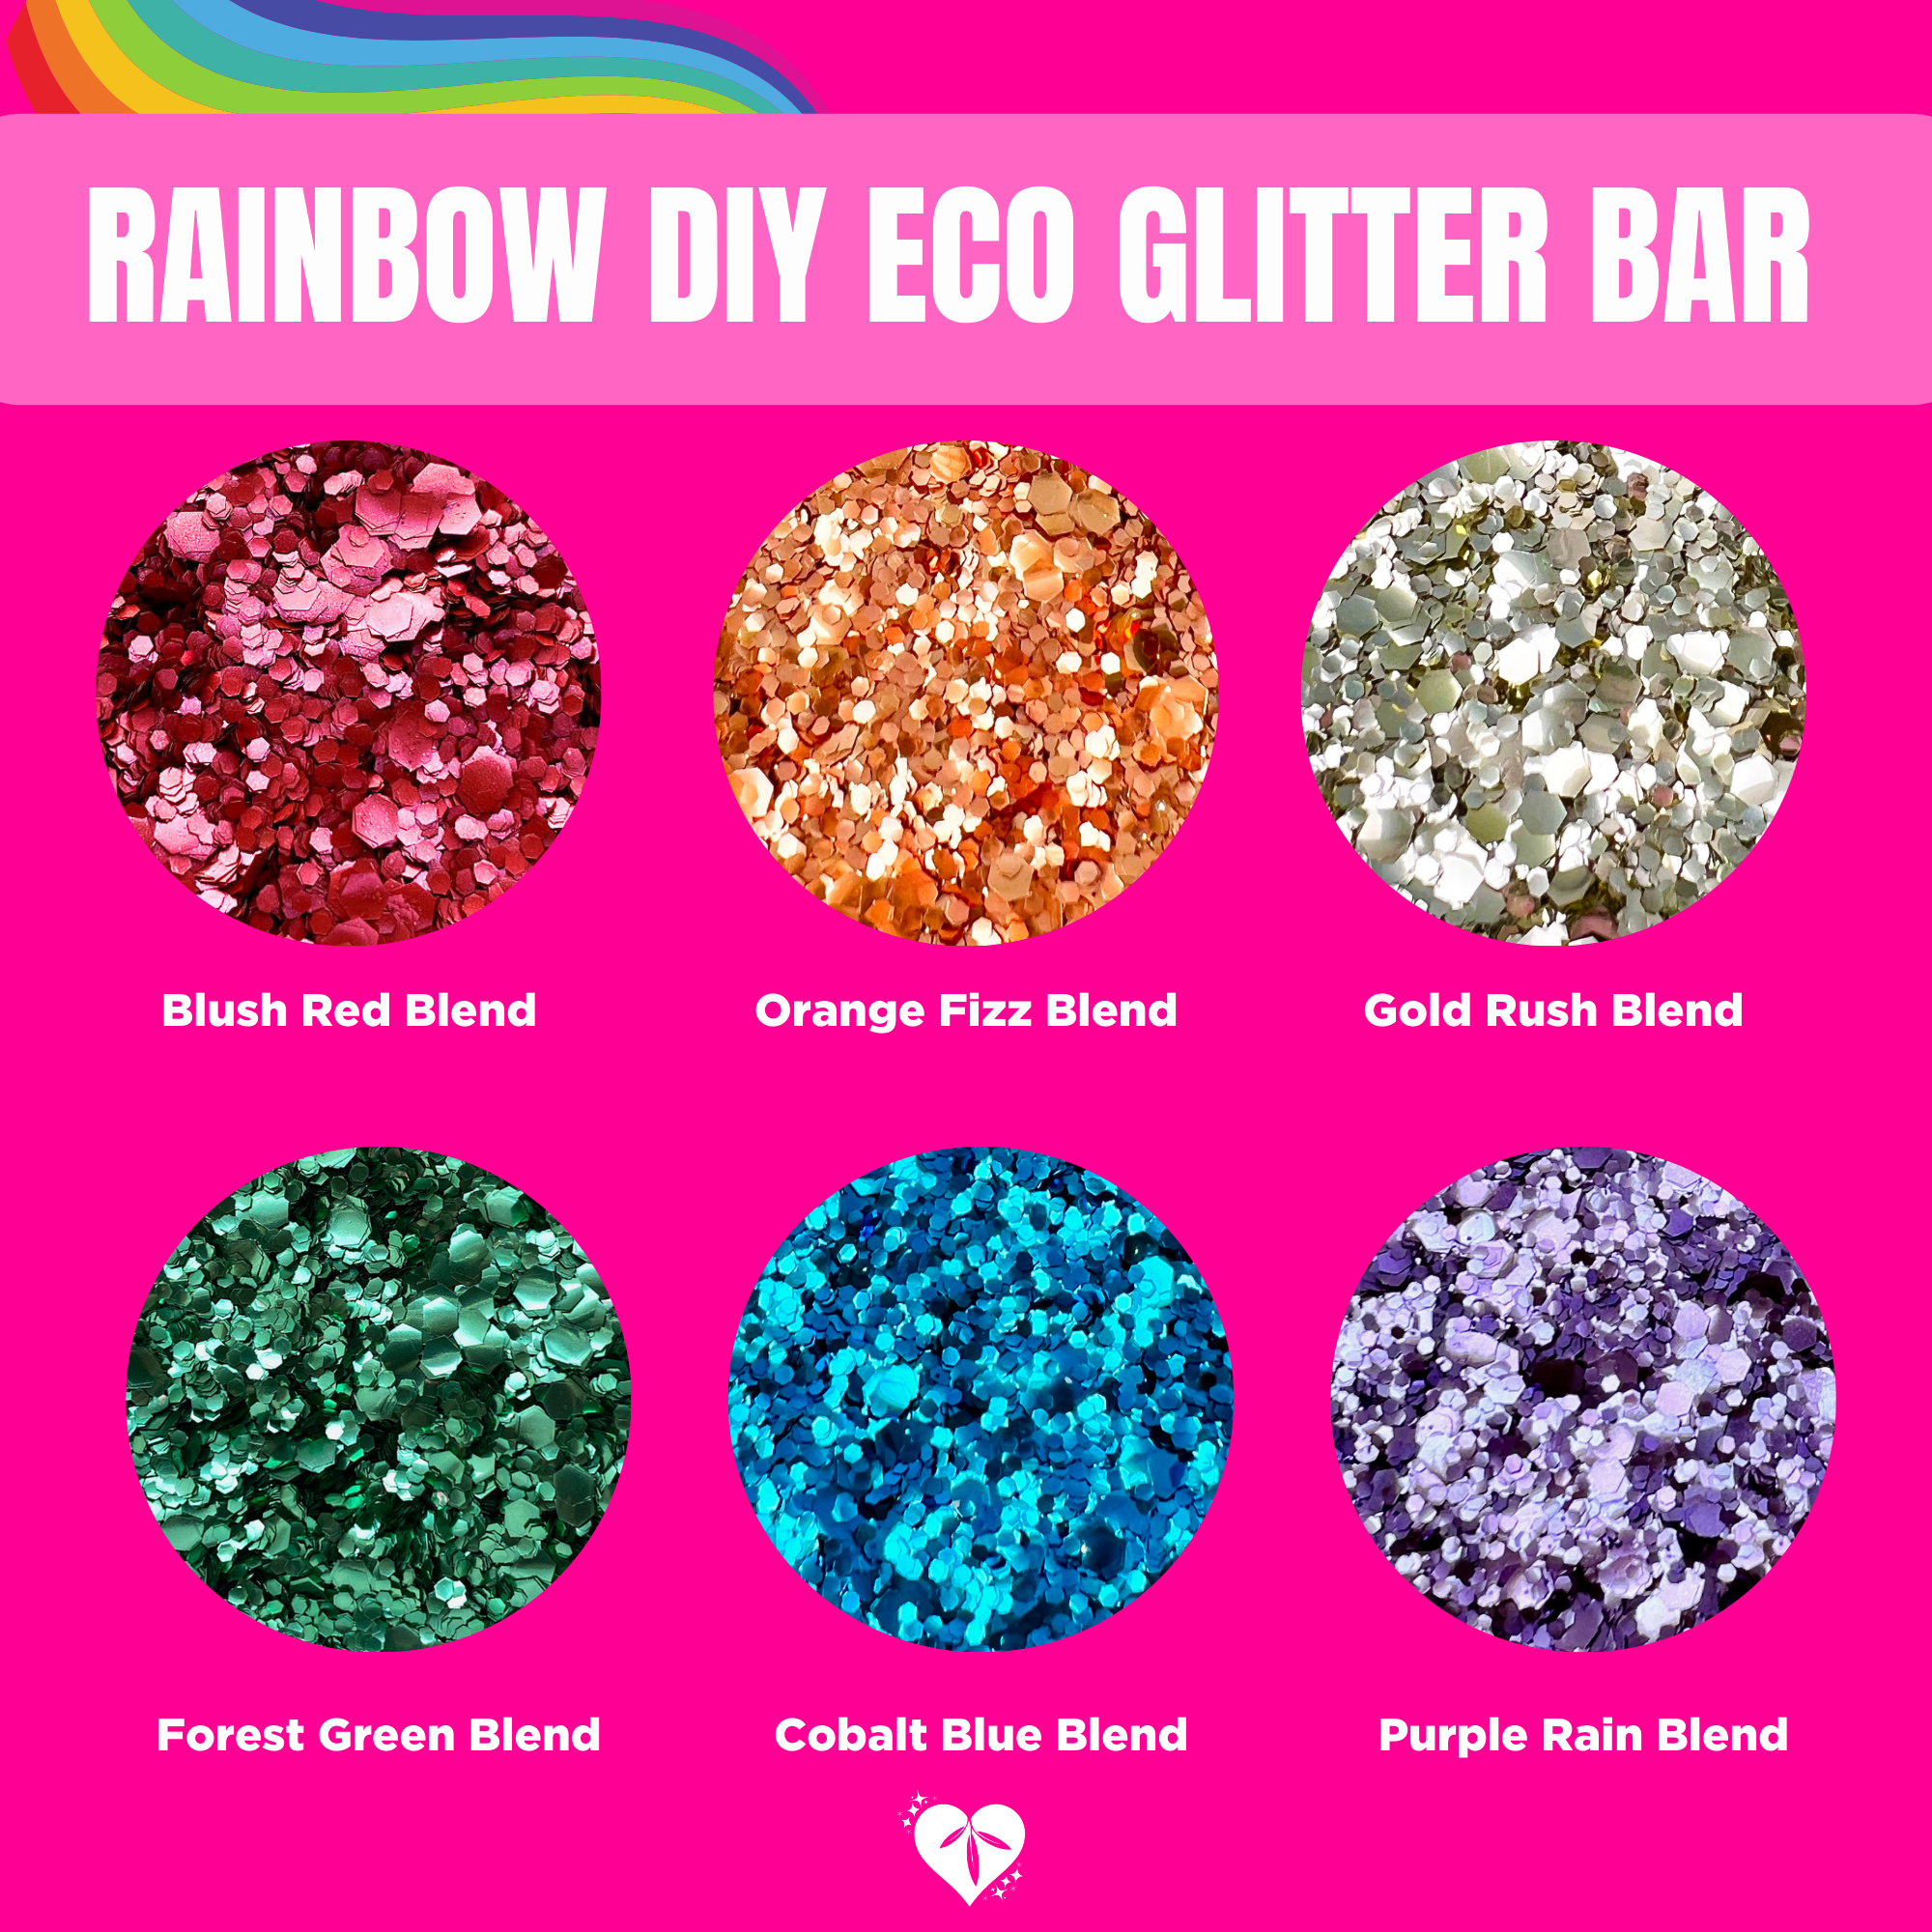 Rainbow DIY eco glitter bar kit including red, orange, gold, green, blue and purple blends.